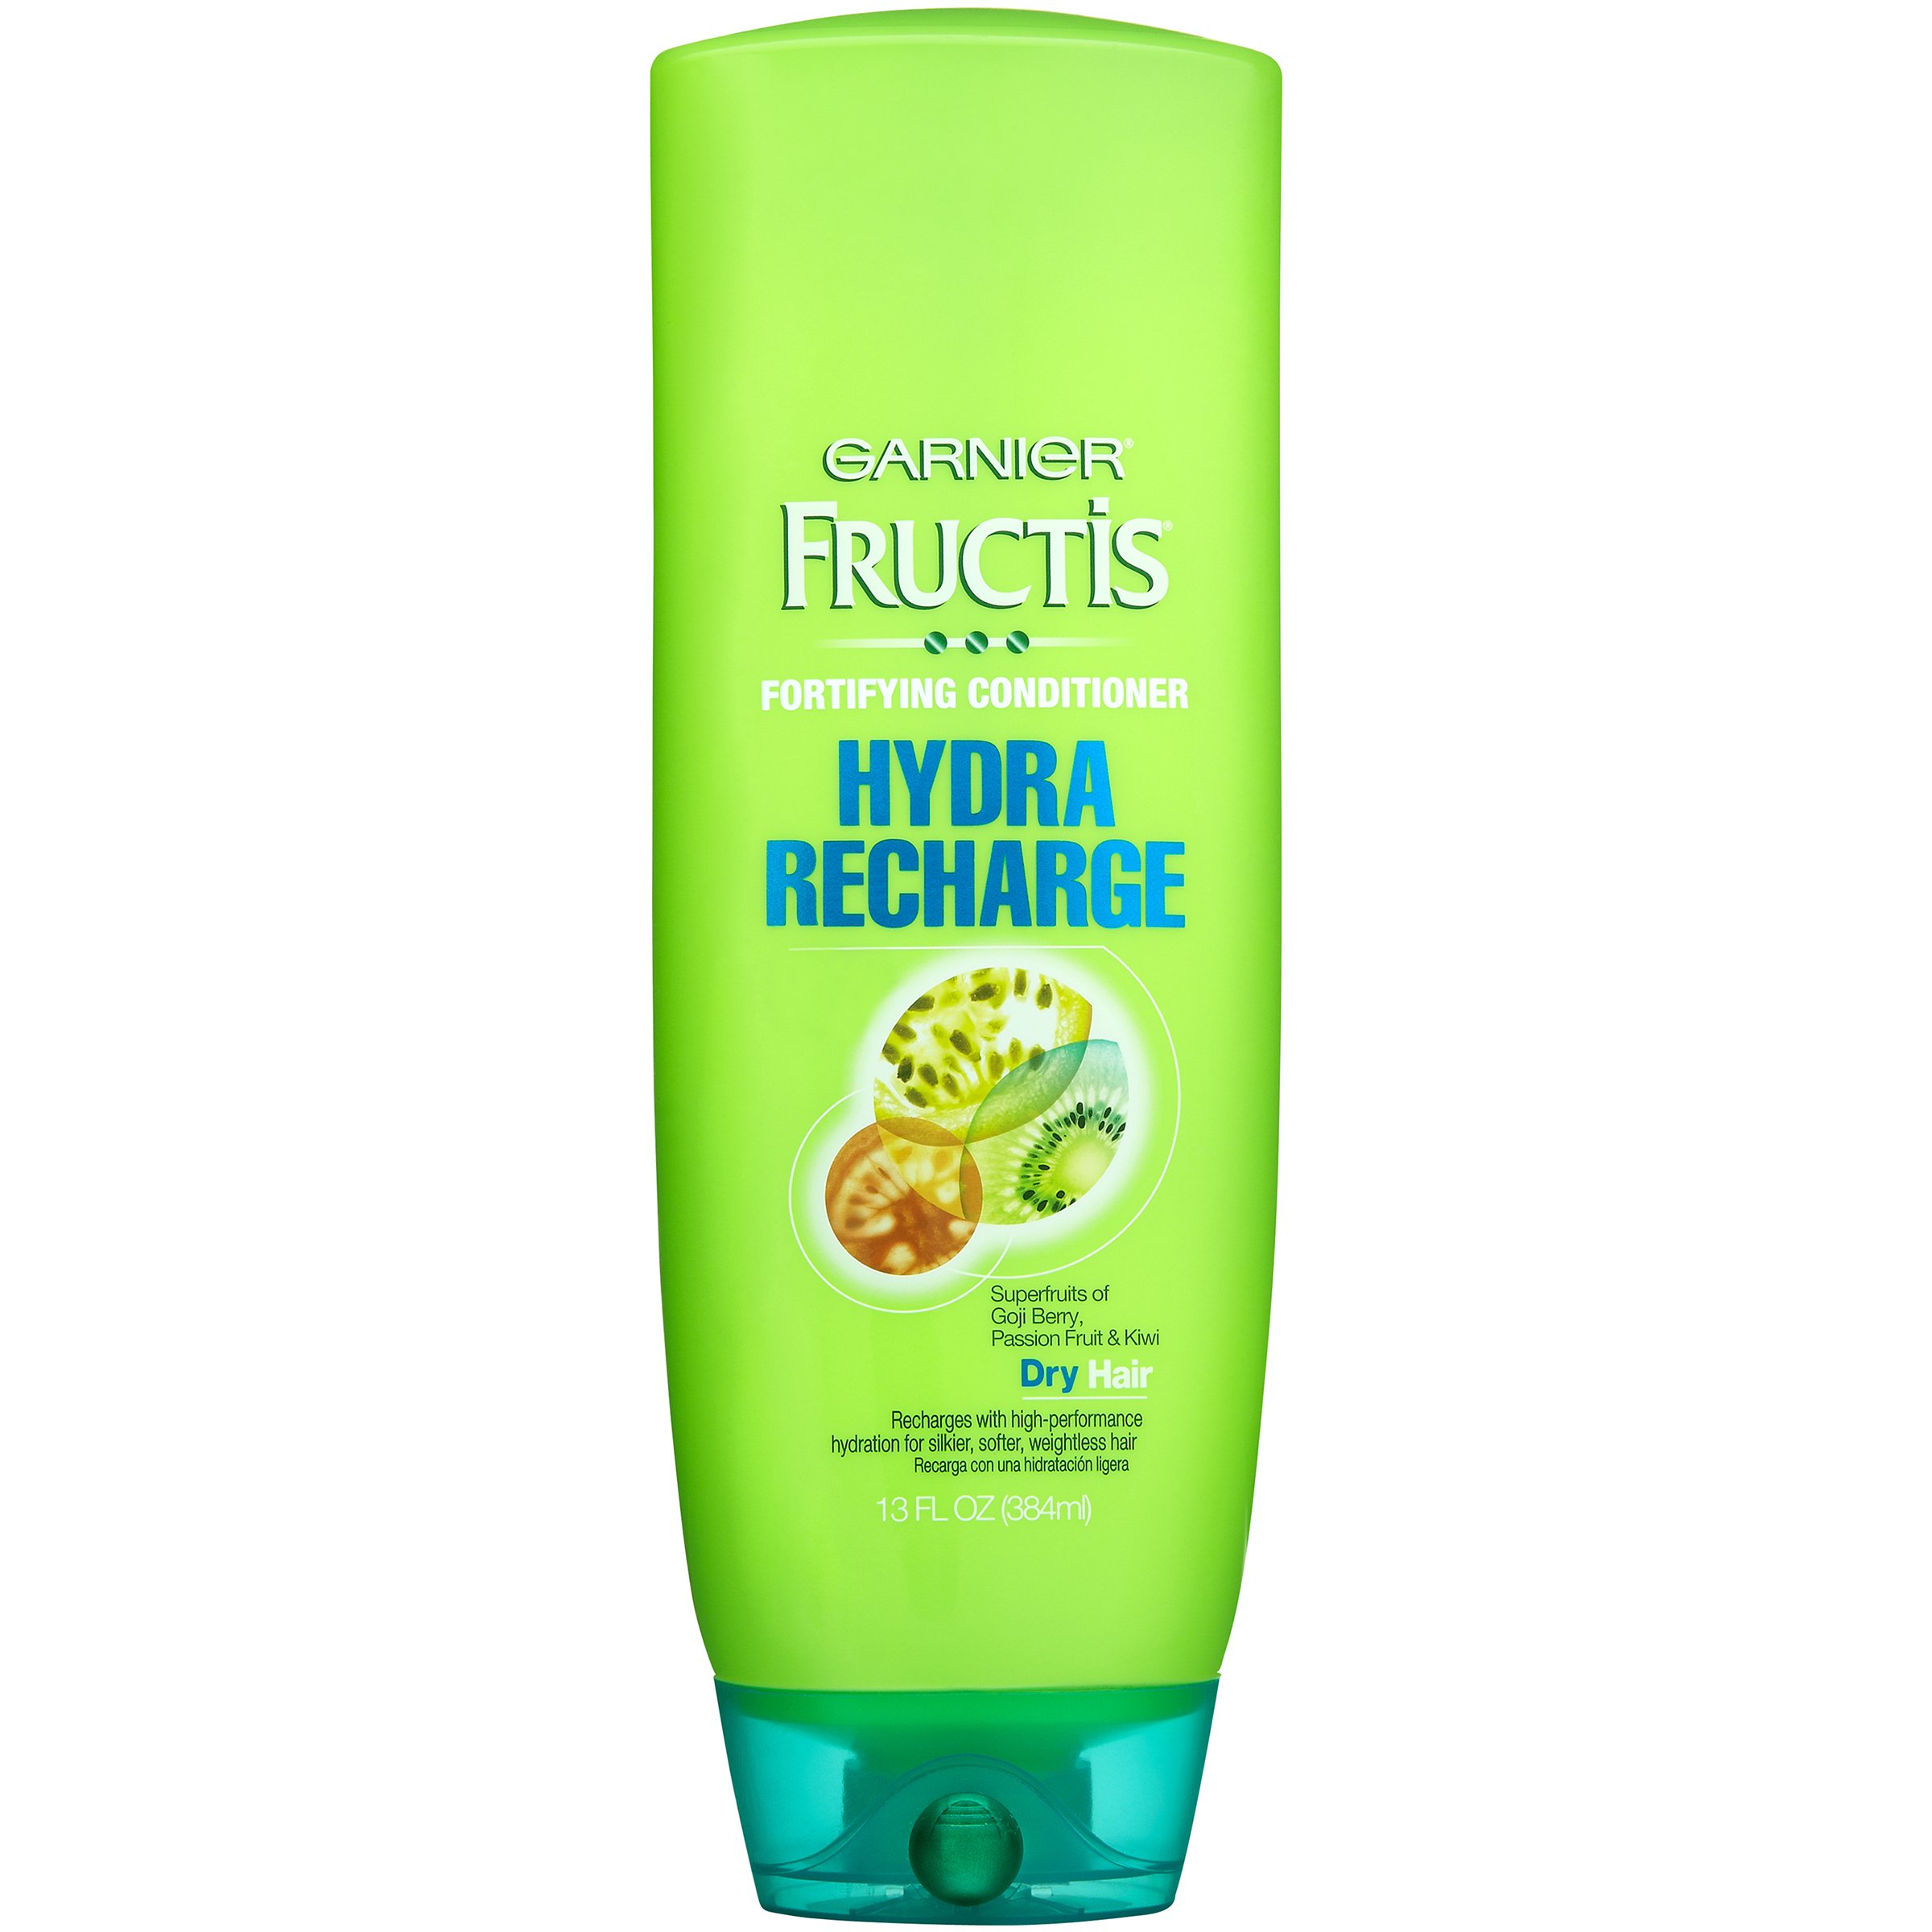 Garnier Fructis Hydra Recharge Fortifying Conditioner for Dry Hair - Shop Garnier  Fructis Hydra Recharge Fortifying Conditioner for Dry Hair - Shop Garnier  Fructis Hydra Recharge Fortifying Conditioner for Dry Hair -